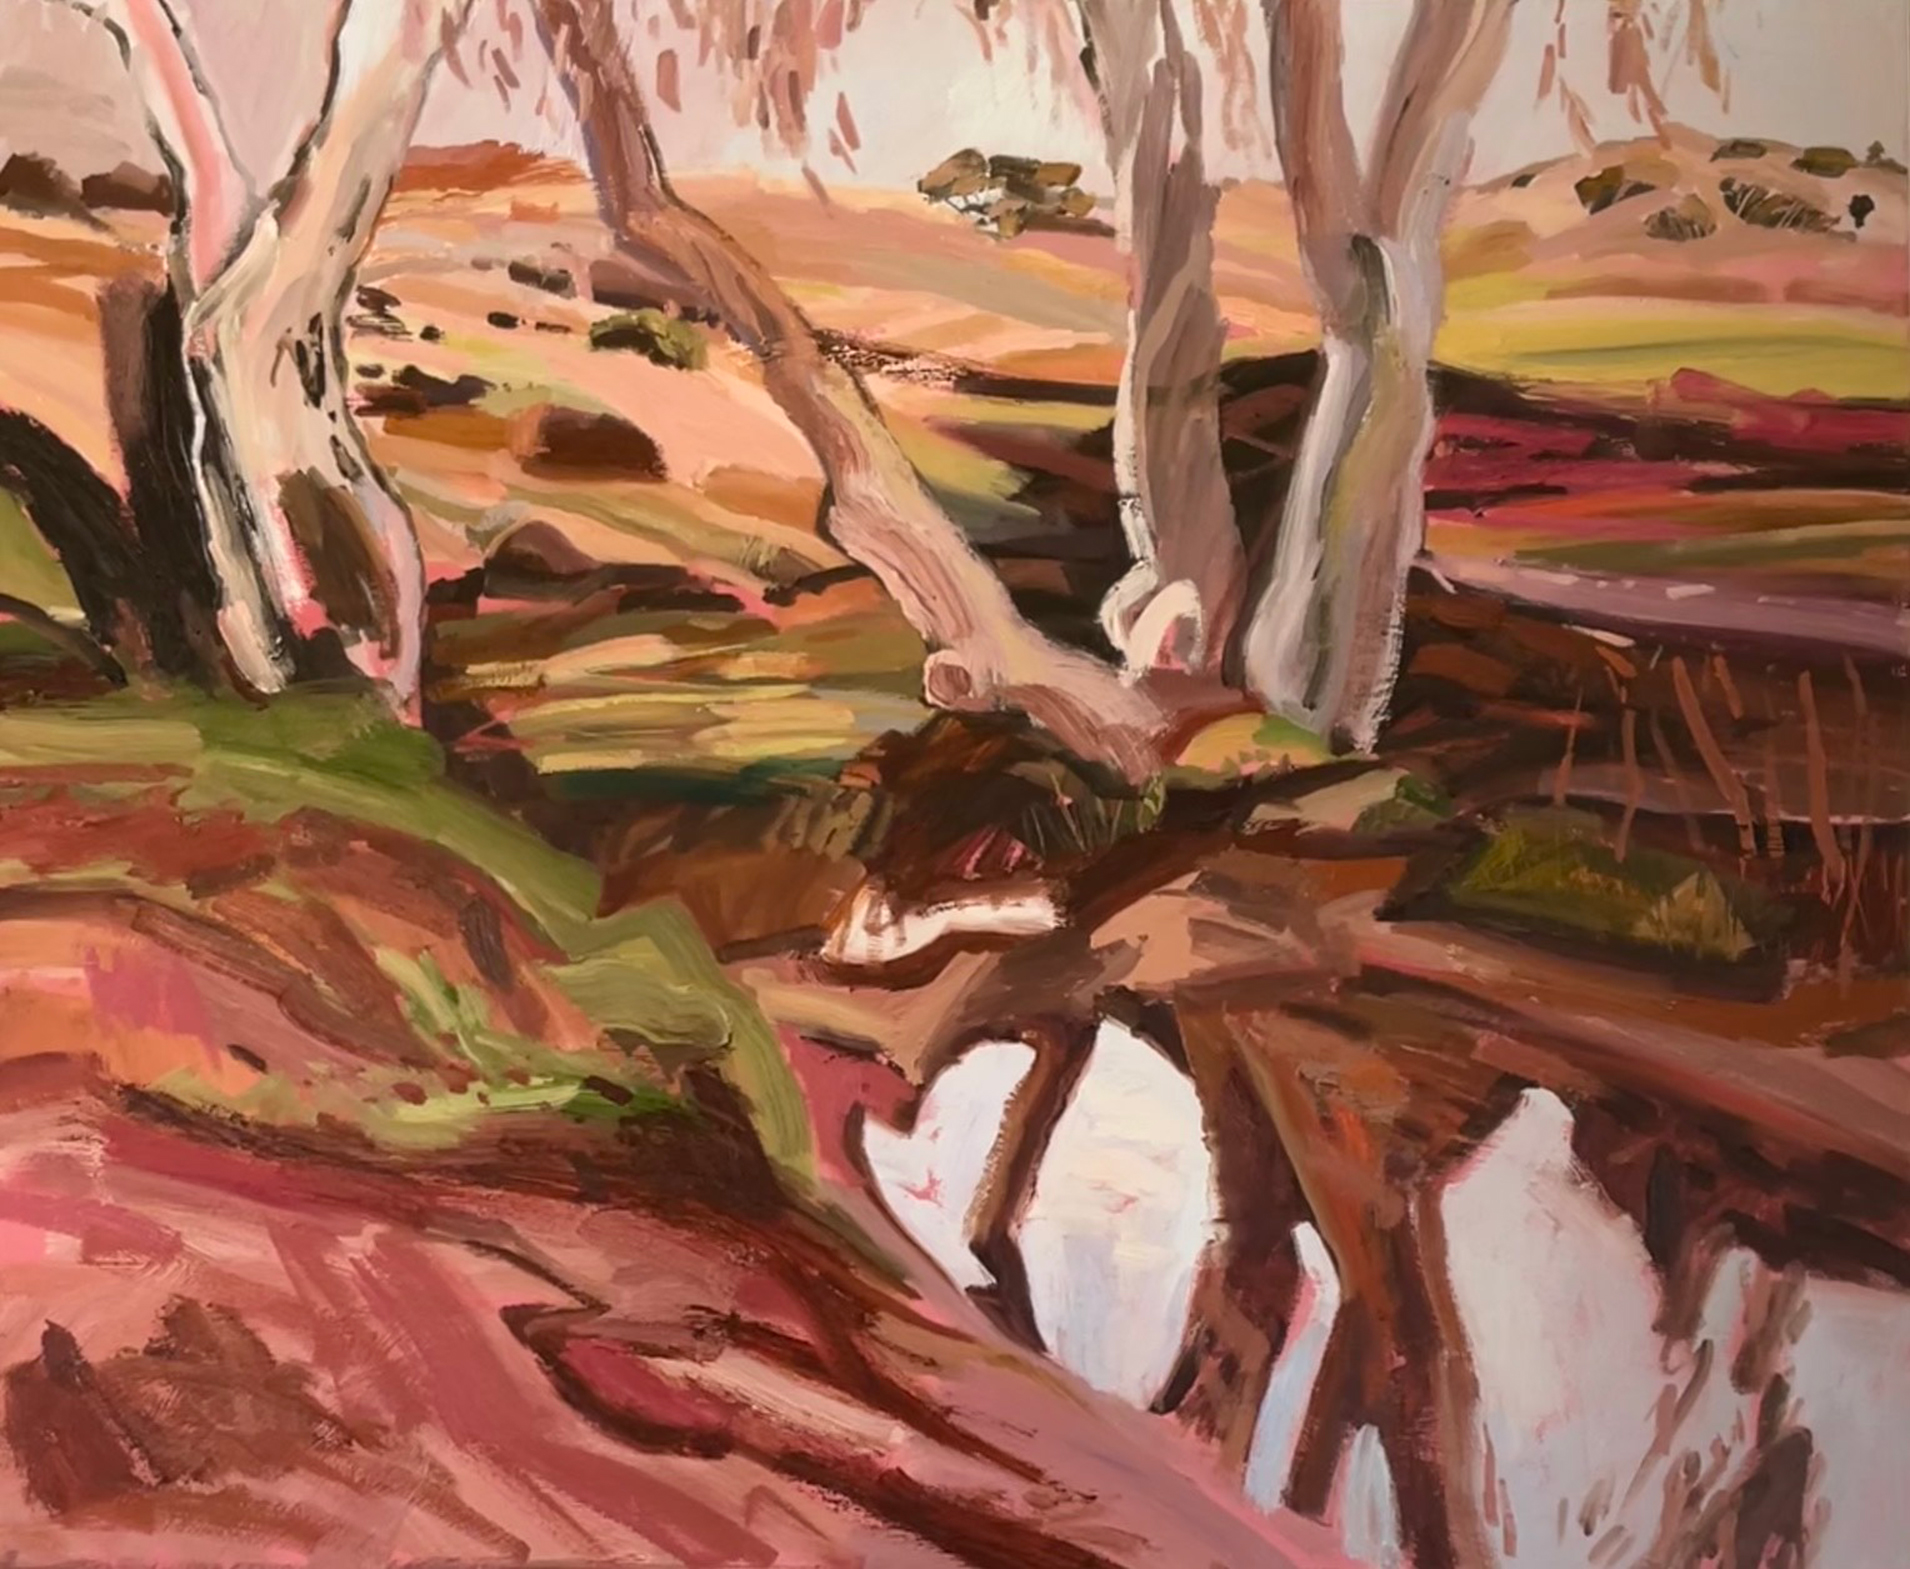 A landscape painting of a red earthed rural landscape with a tree reflected in water.